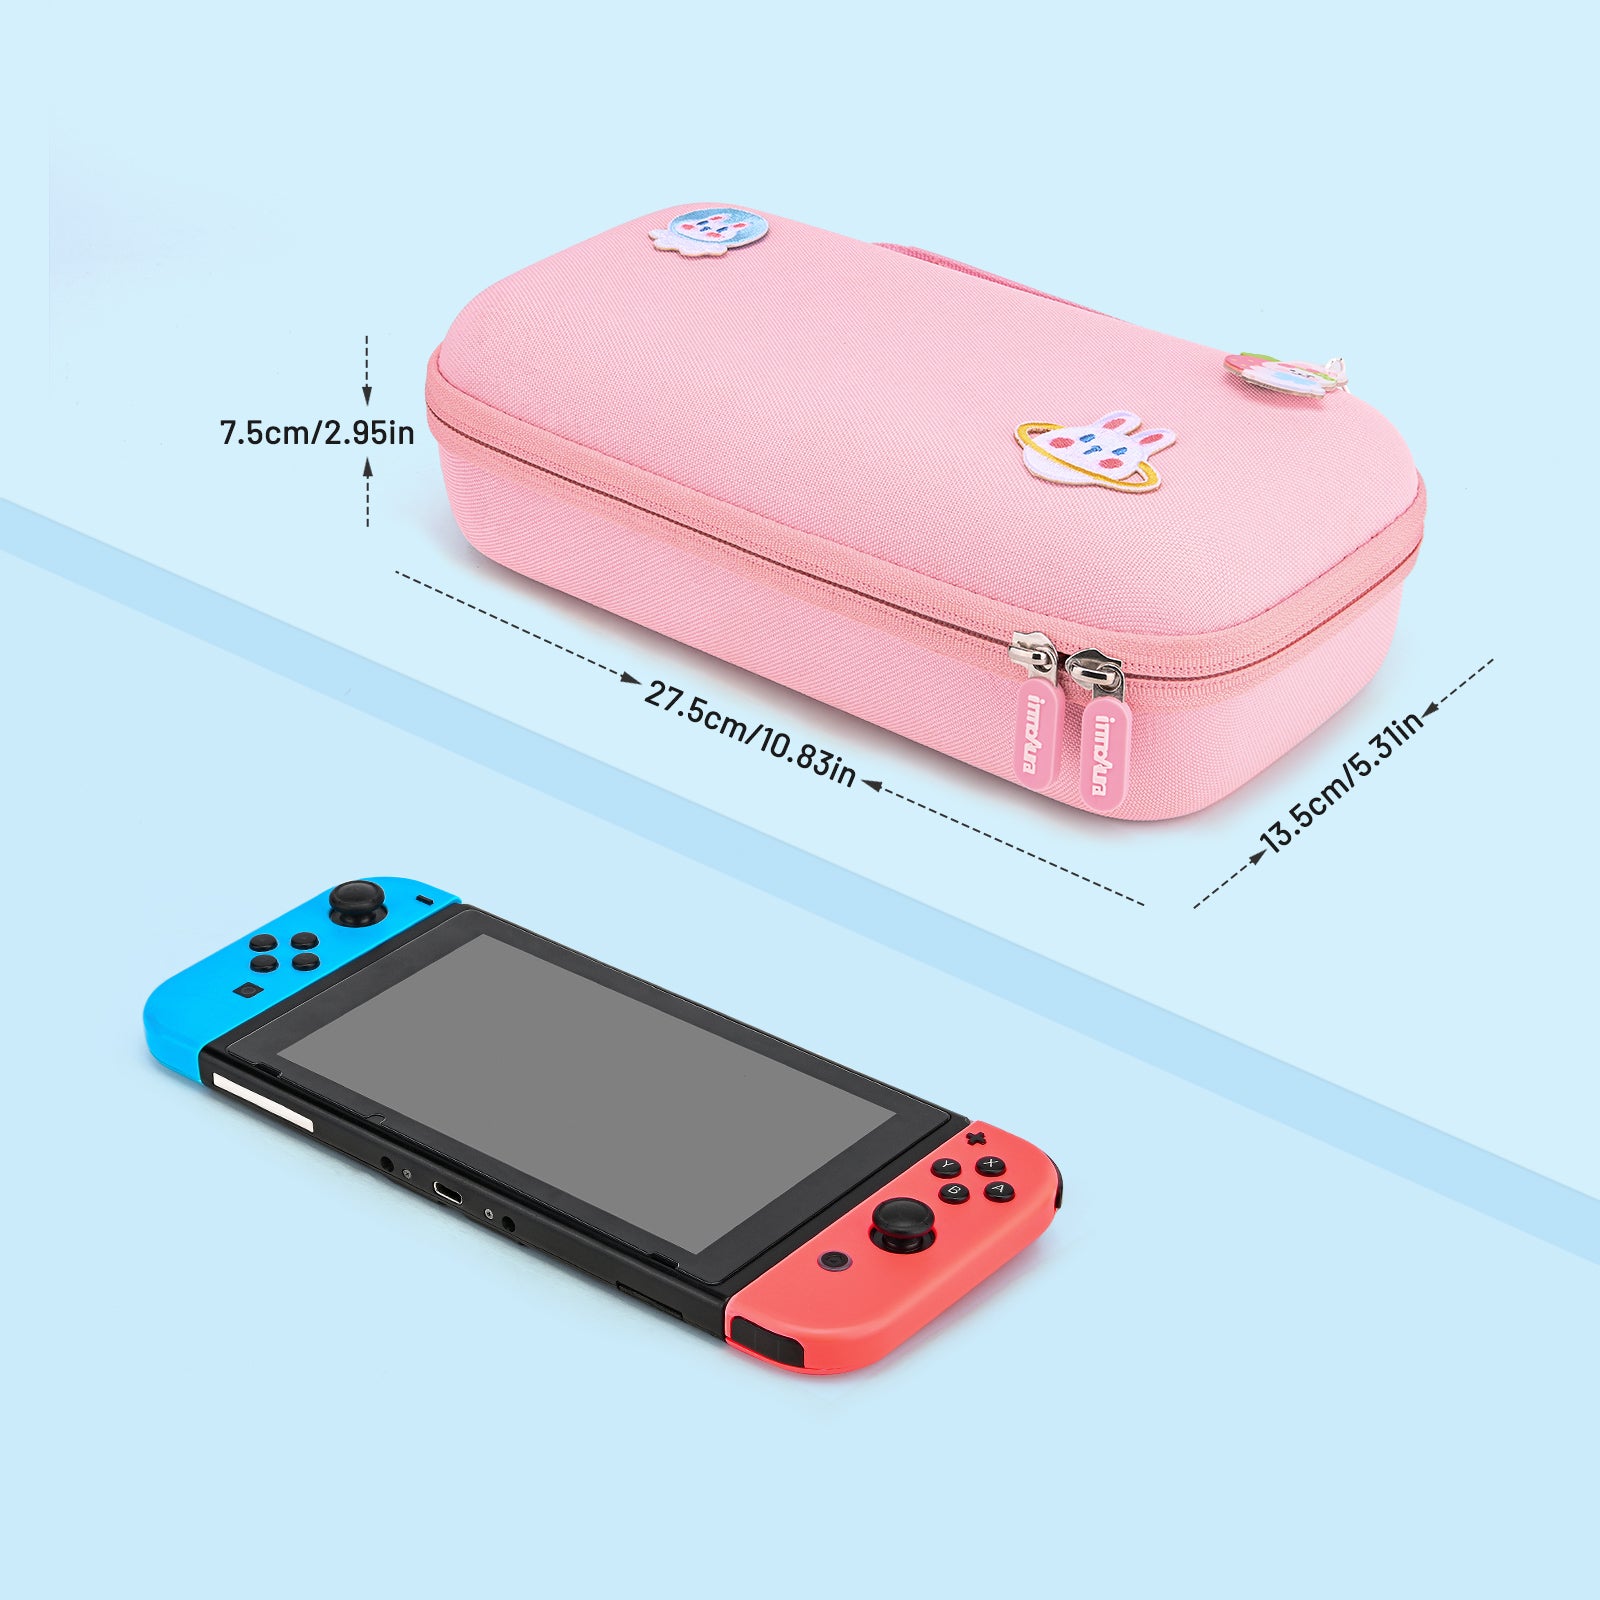 innoAura Cute Hard Switch Carrying Case for Nintendo Switch with 18 Accessories Gifts